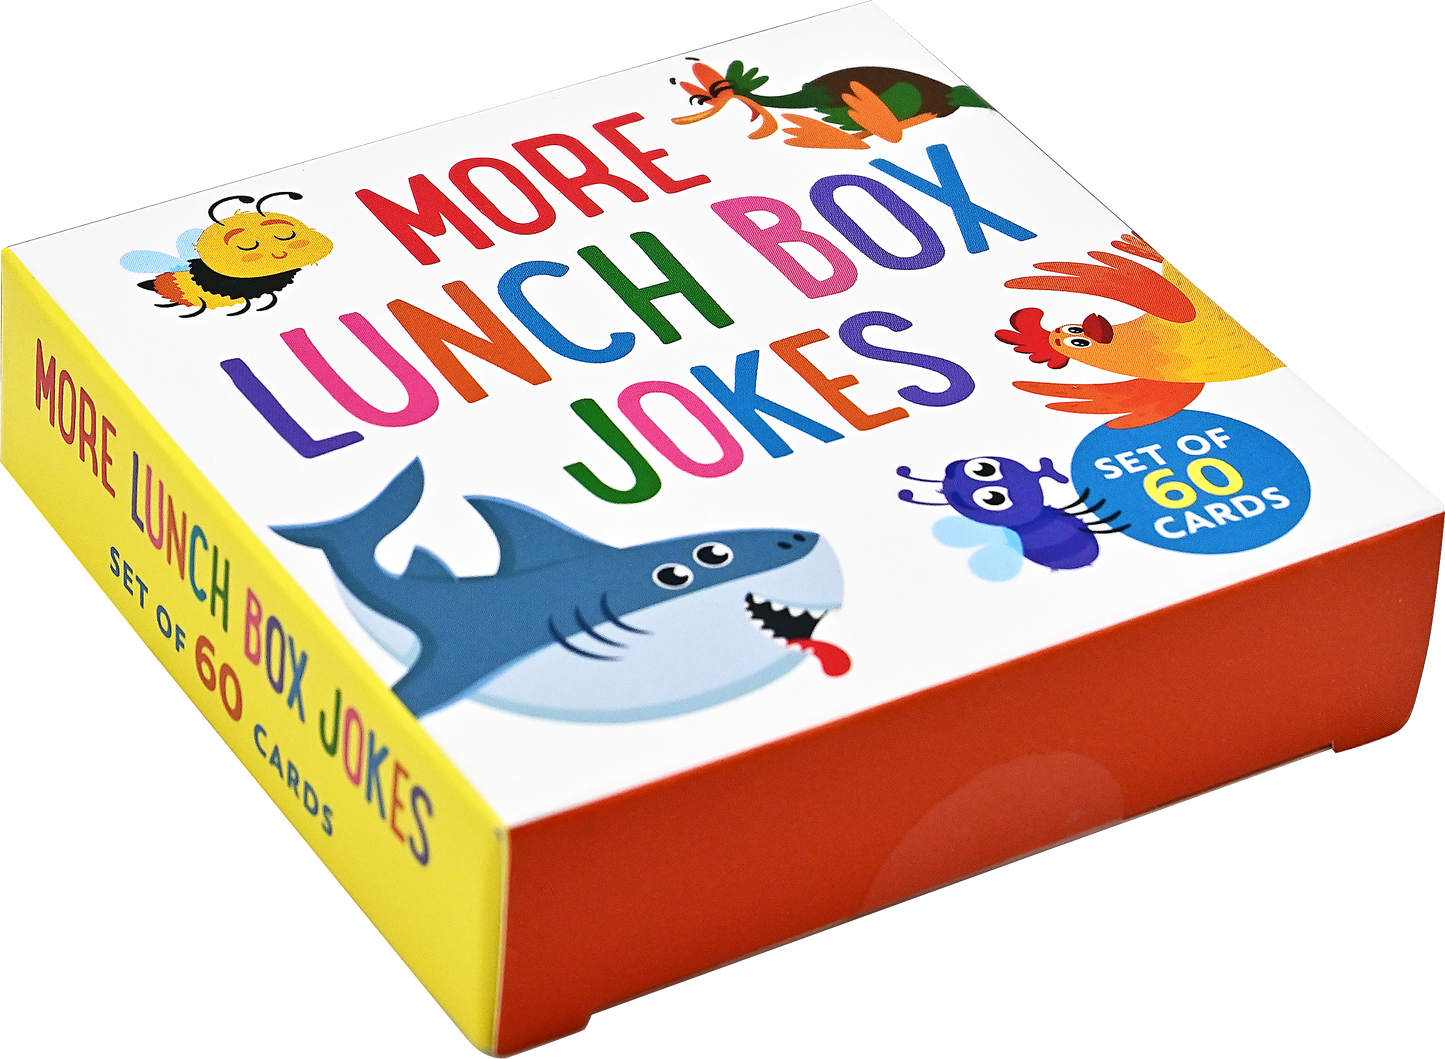 More Lunch Box Jokes Card Deck (Set of 60 cards)